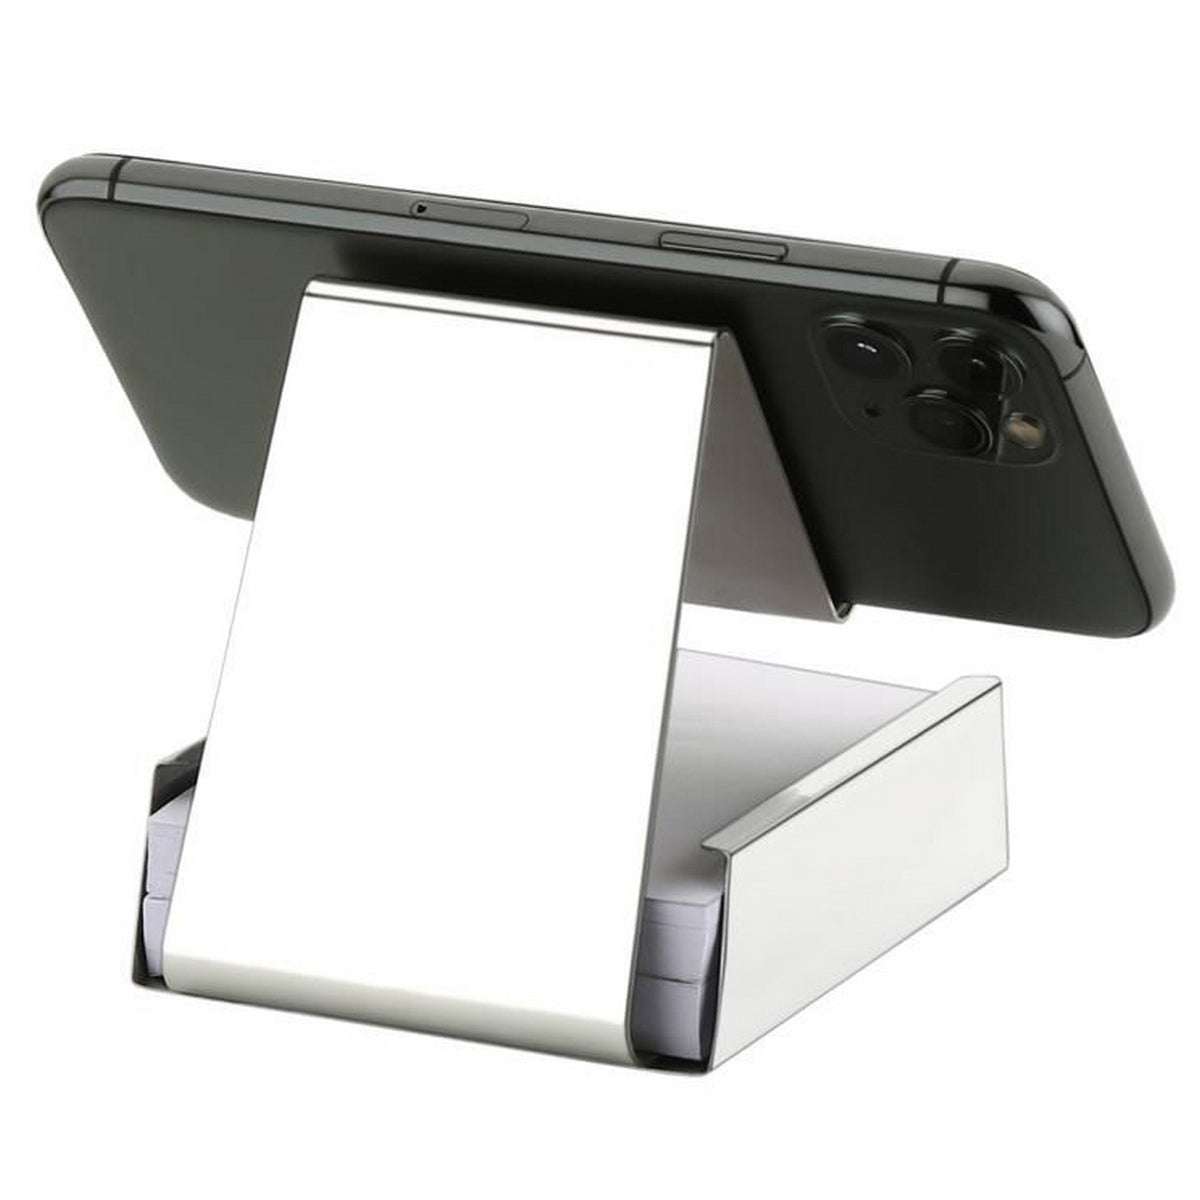 Silver Metal Mirror Finish Universal Mobile Phone Holder Stand with Writing Pad - For Personal, Corporate Gifting, Return Gift, Event Gifting, Promotional Freebies JAR-1106